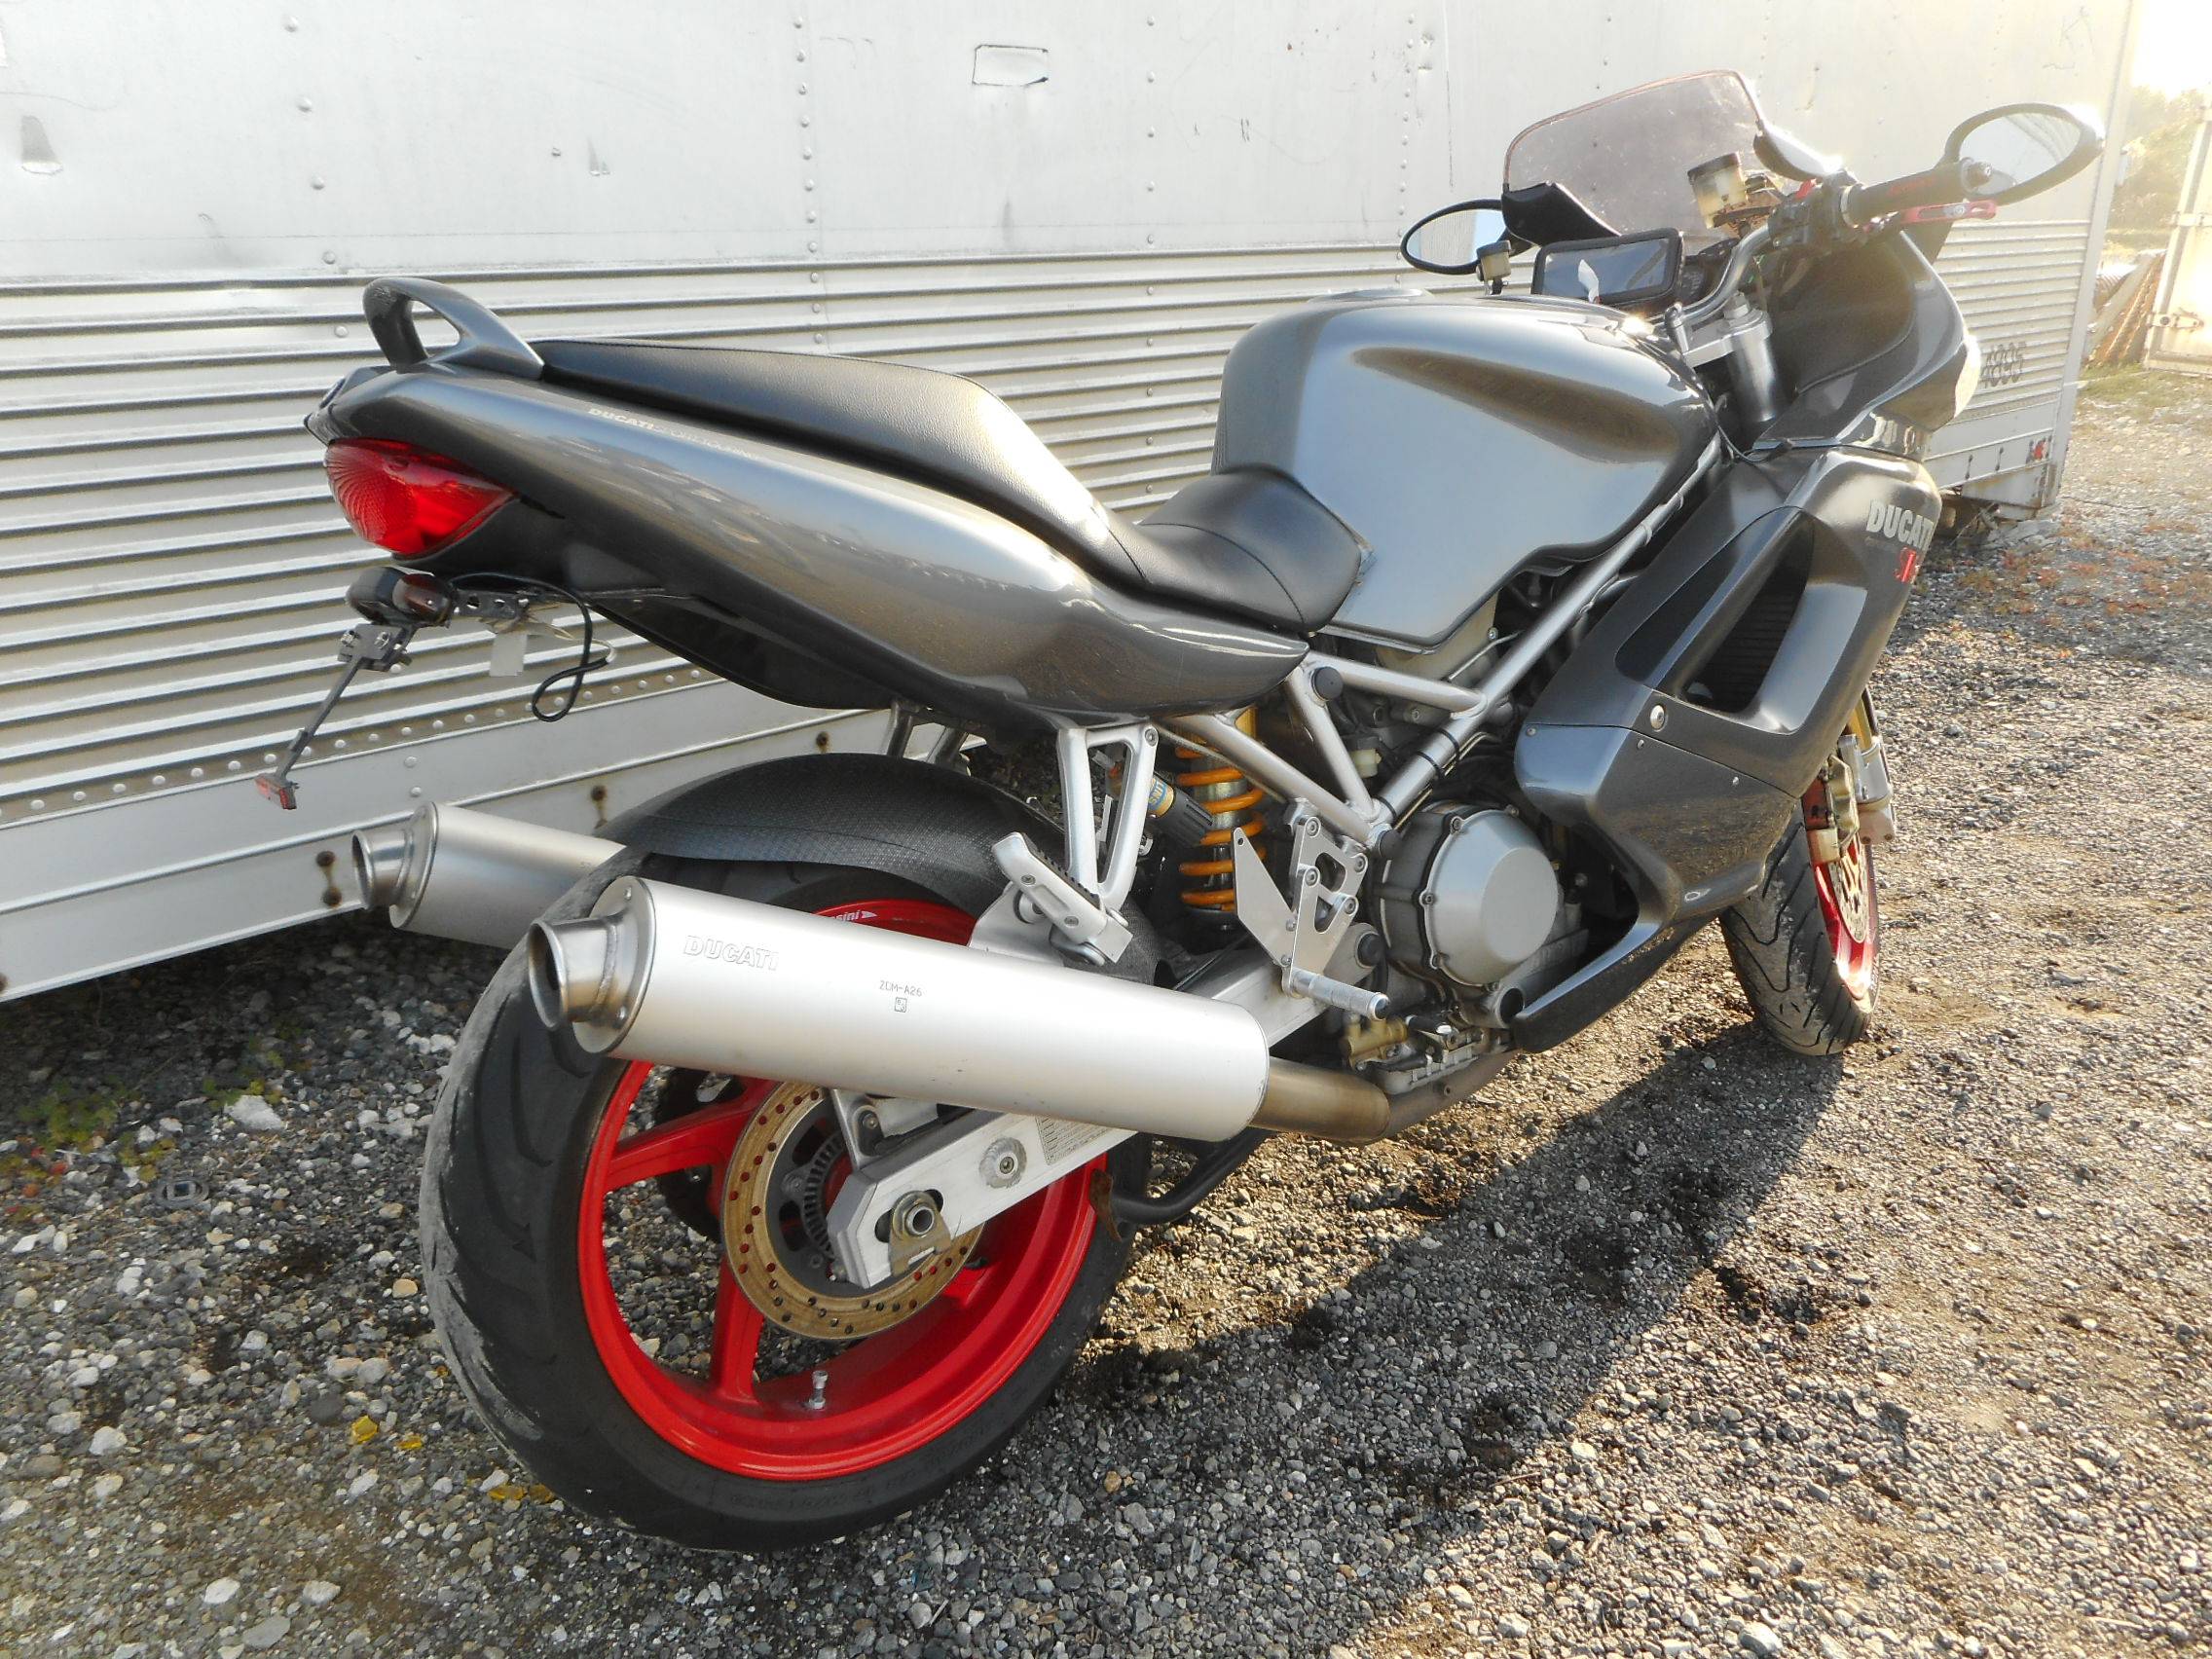 Ducati st4s abs owner's manual